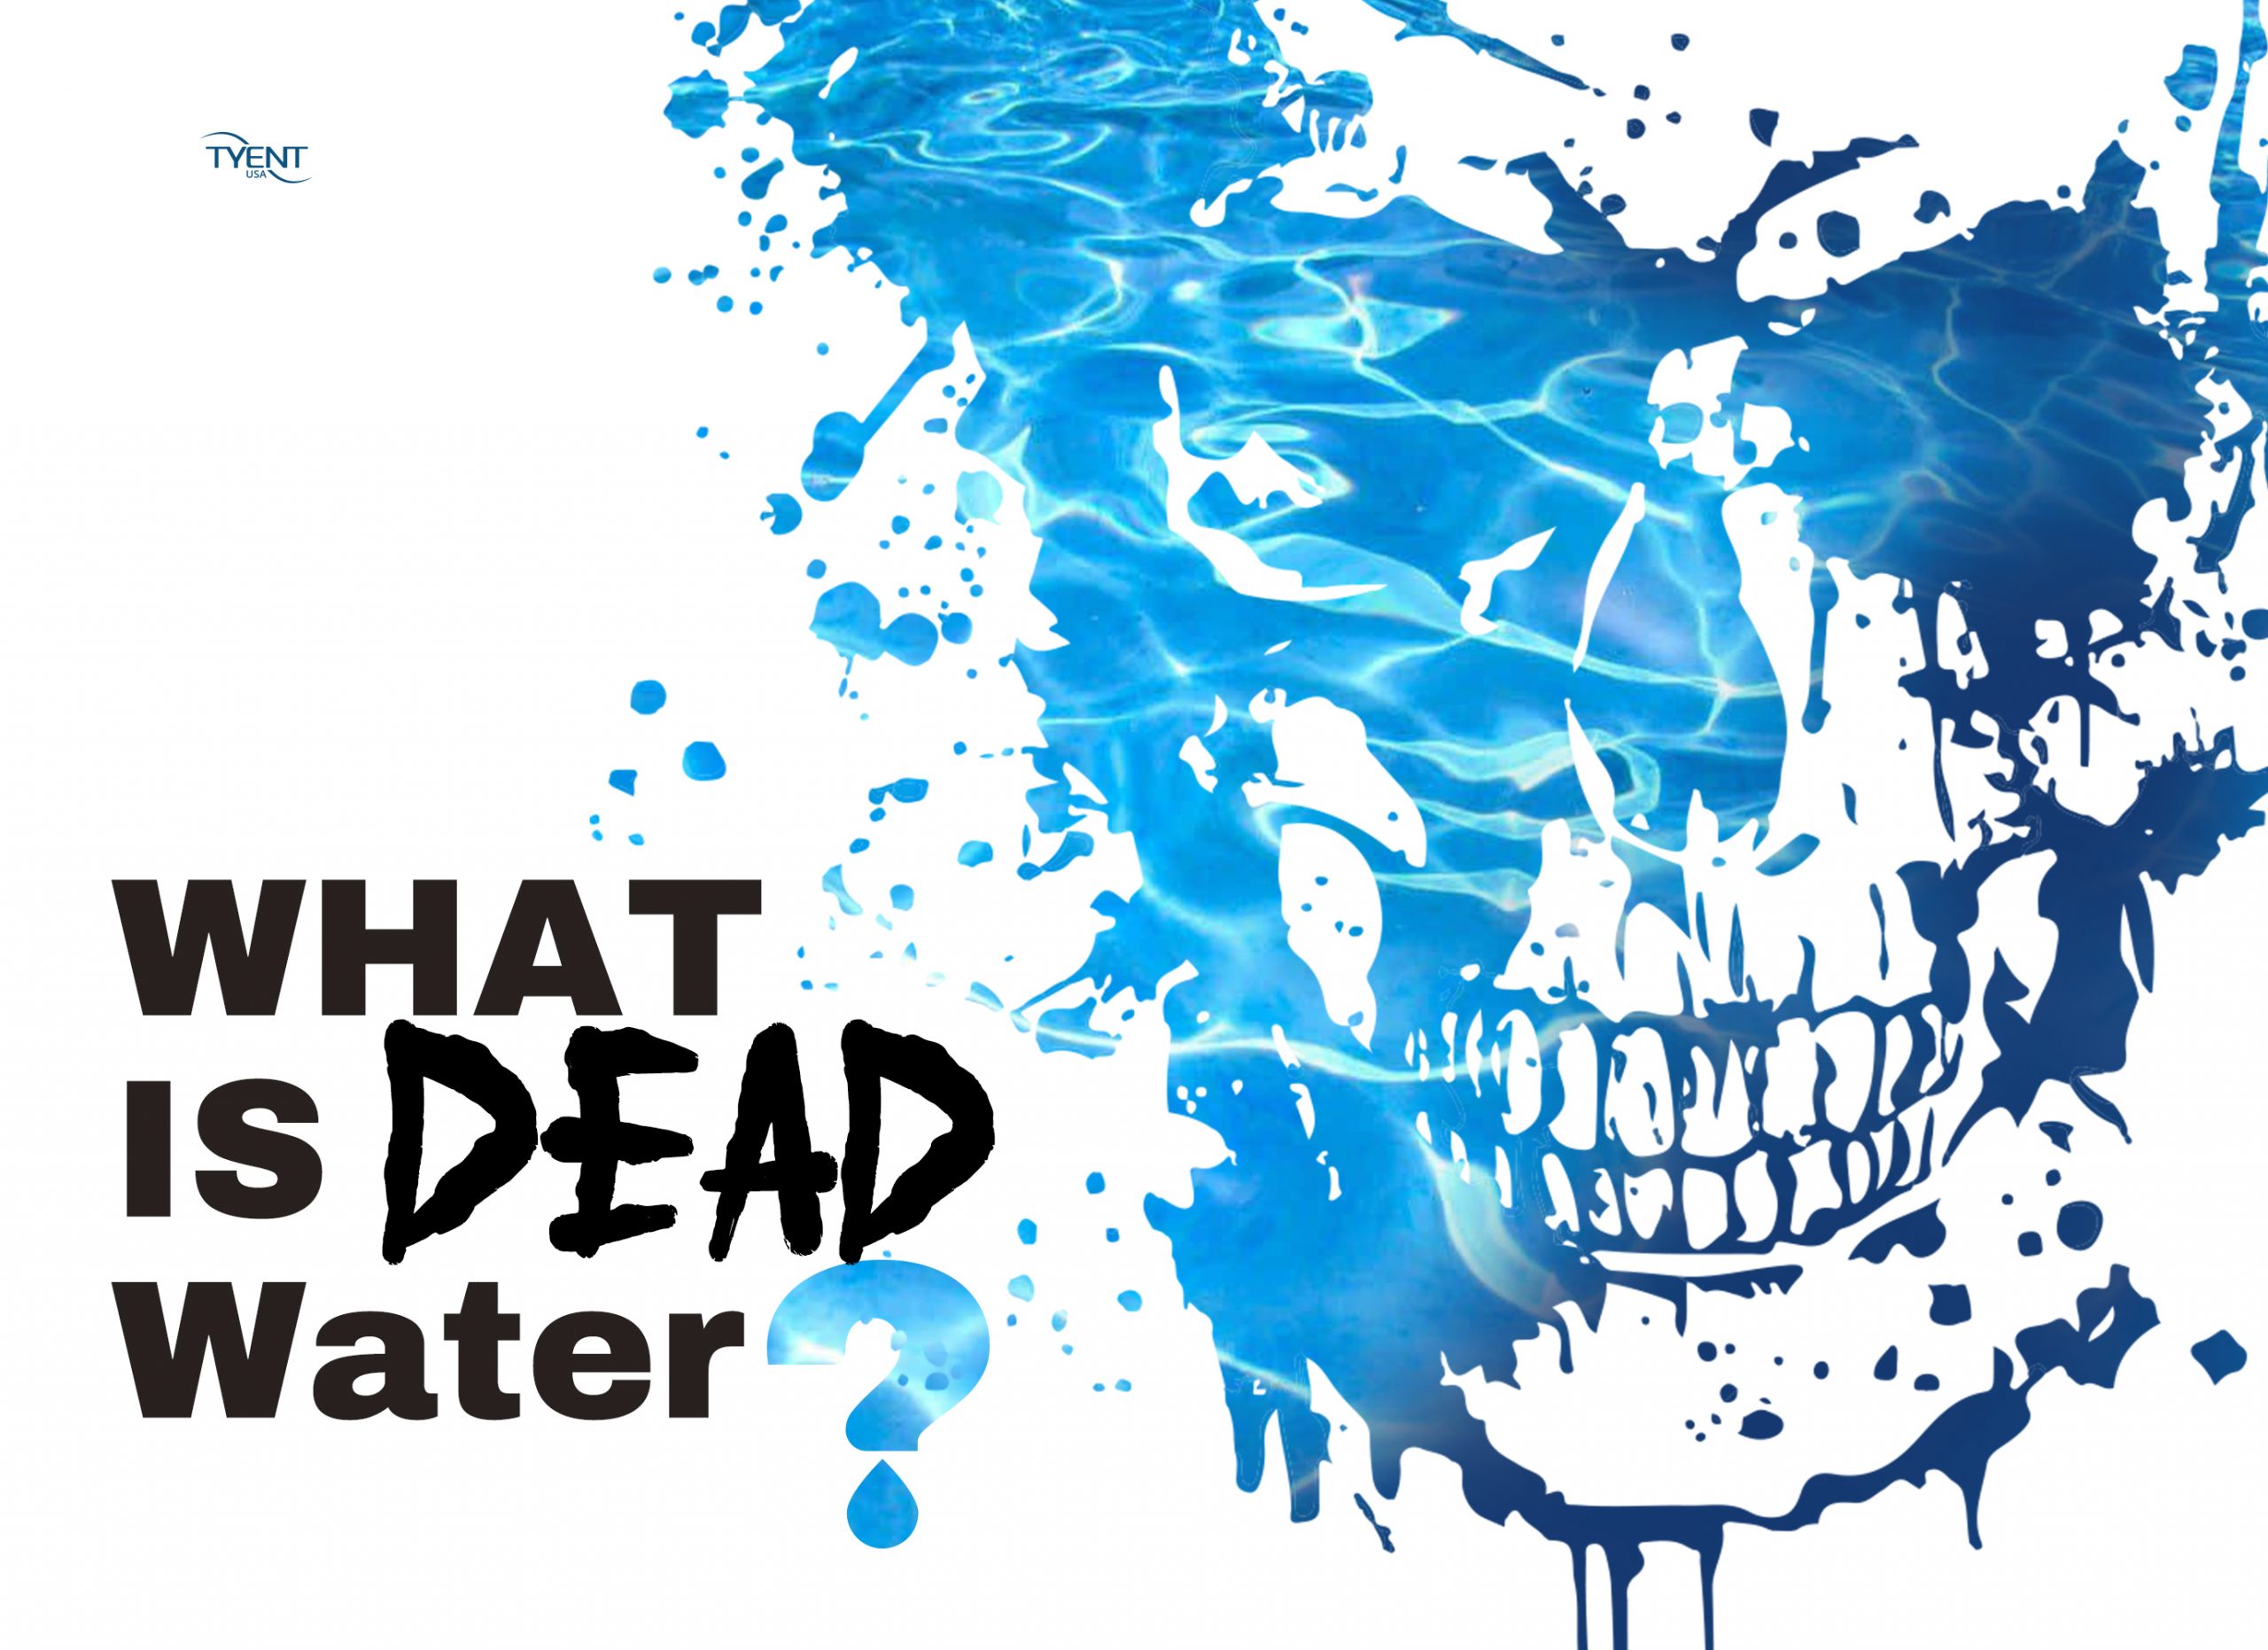 WHAT IS DEAD Water